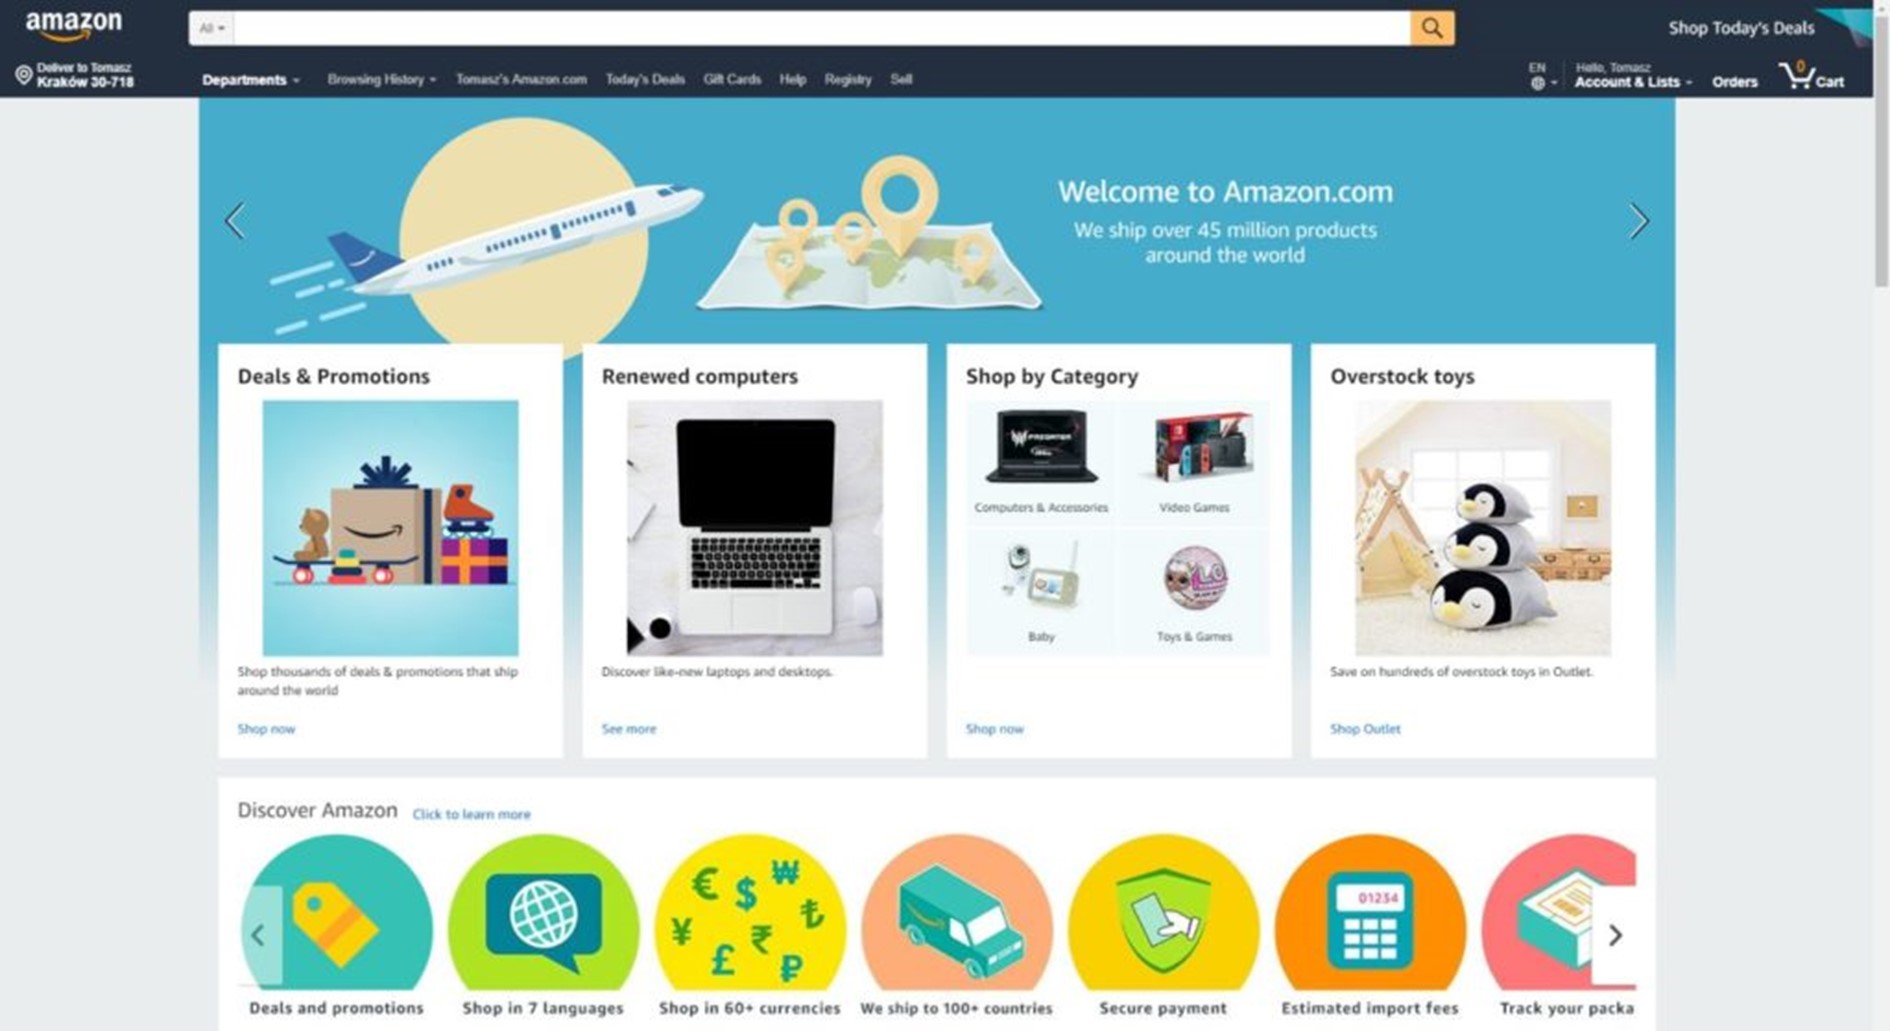 Amazon is the biggest online store in the world with access to customers from the USA